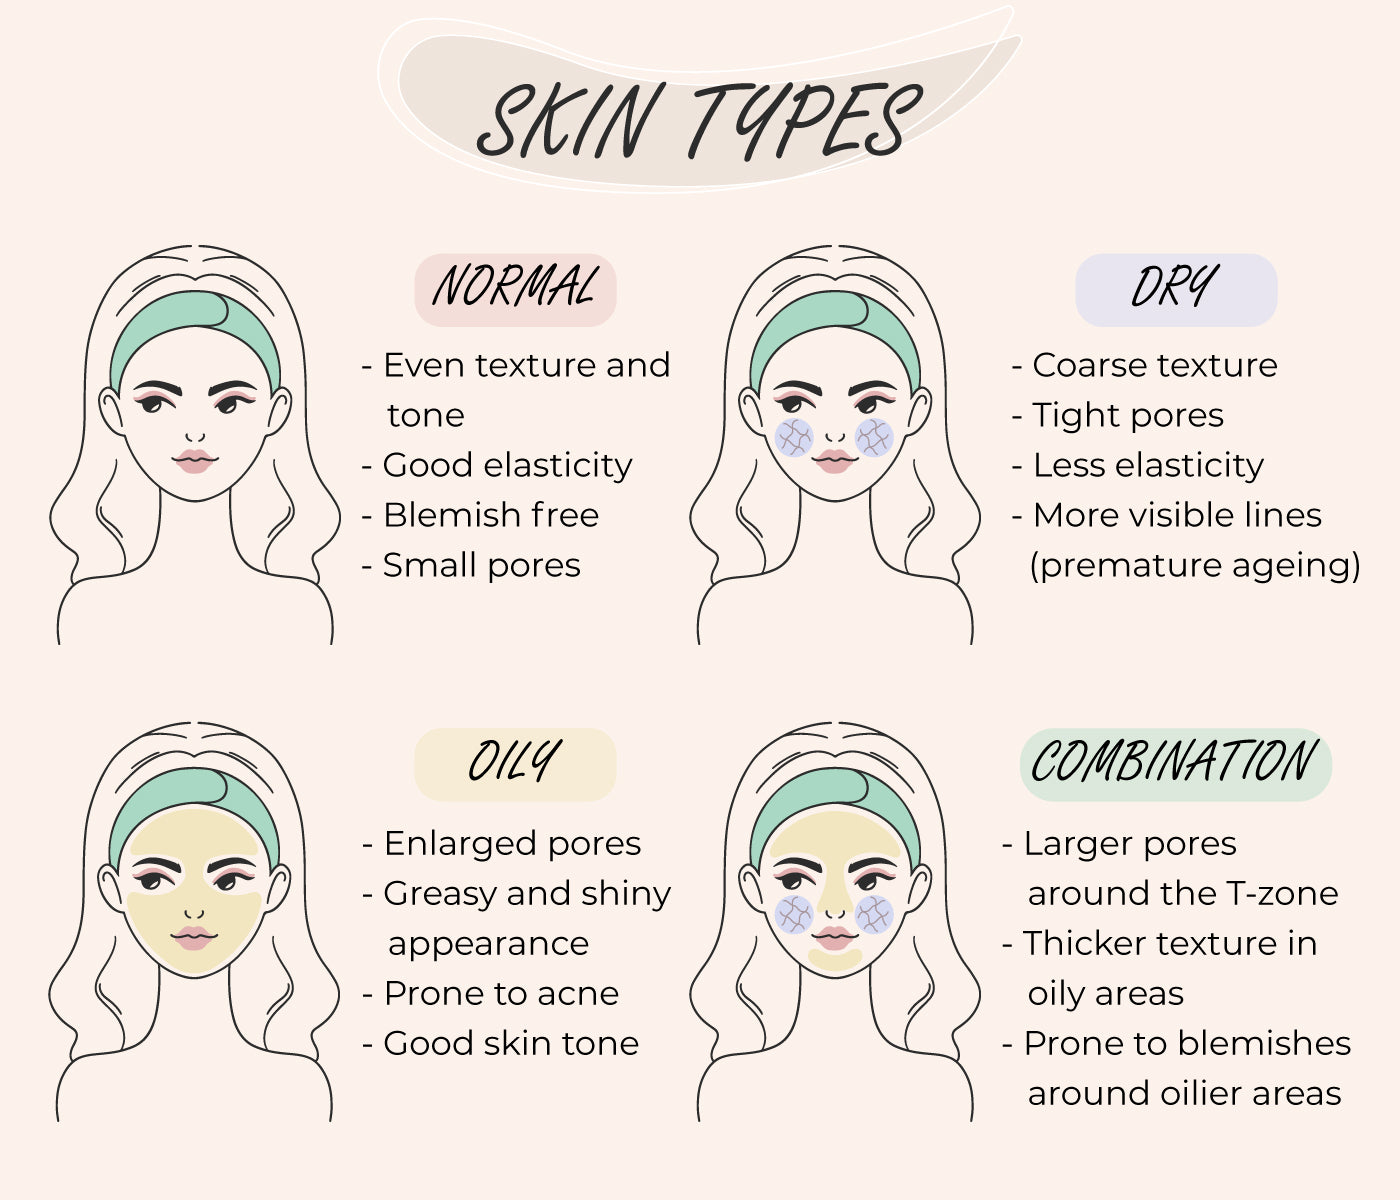 Are they safe for all skin types?